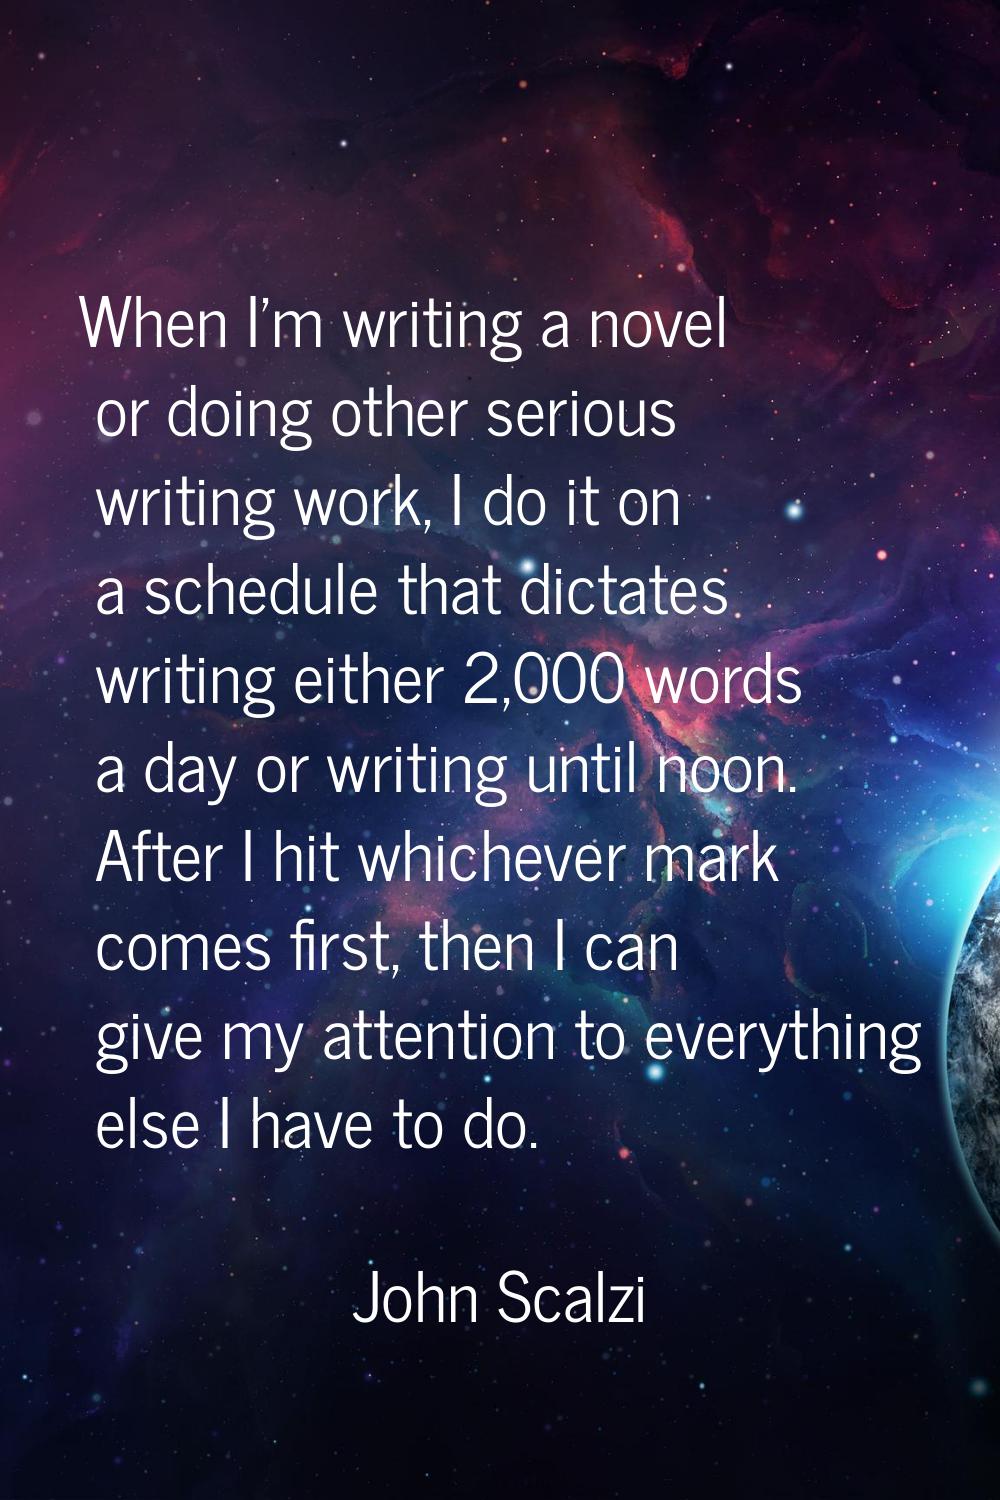 When I'm writing a novel or doing other serious writing work, I do it on a schedule that dictates w